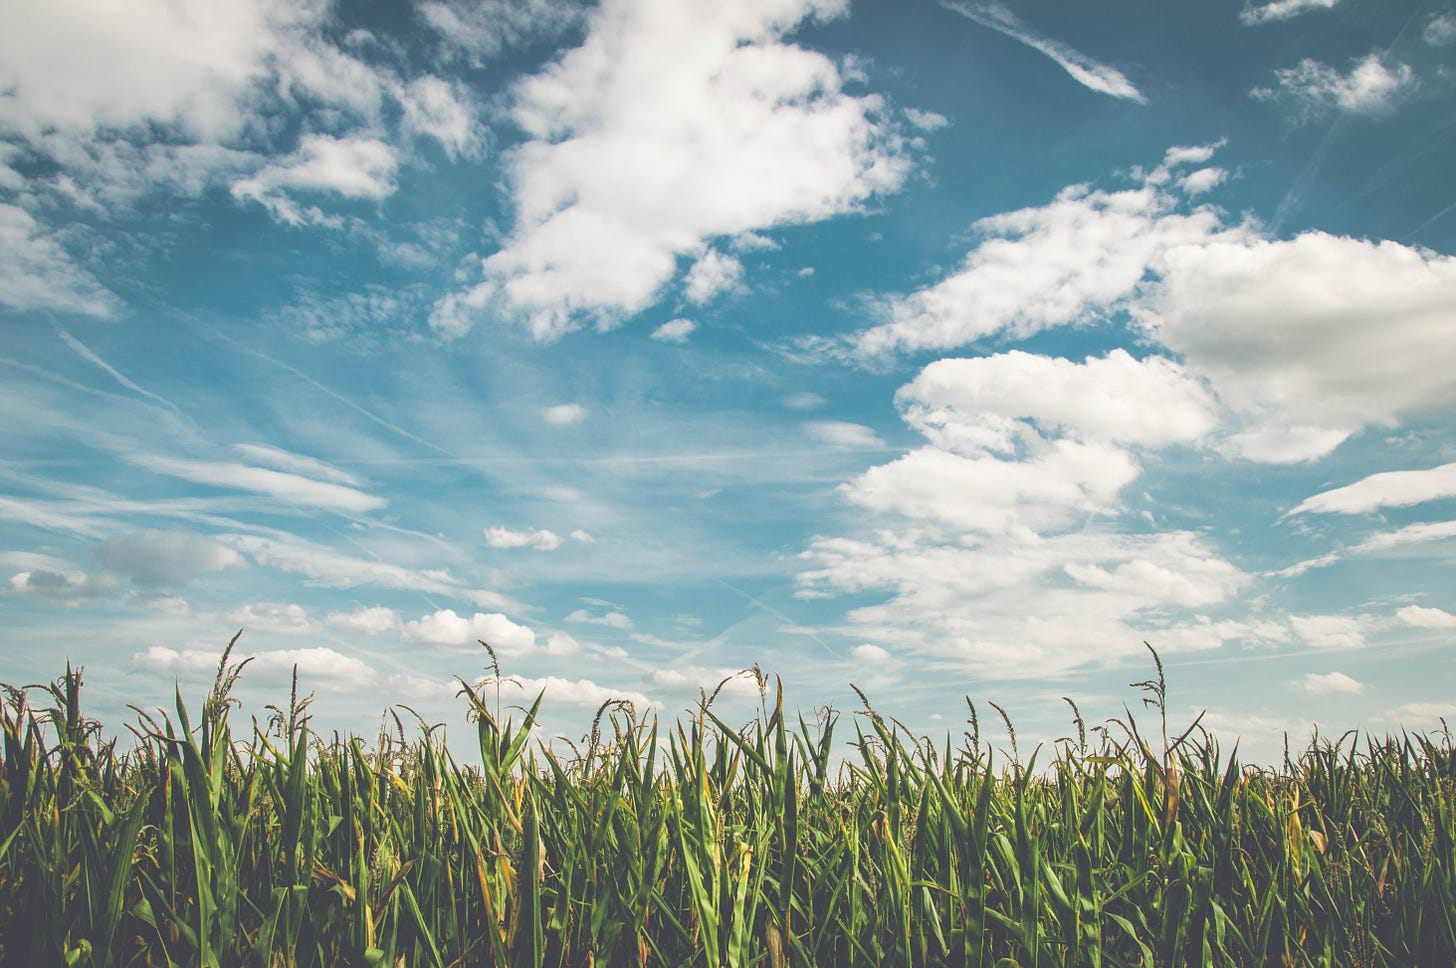 Image of a blue sky with white clouds above the top of a corn field